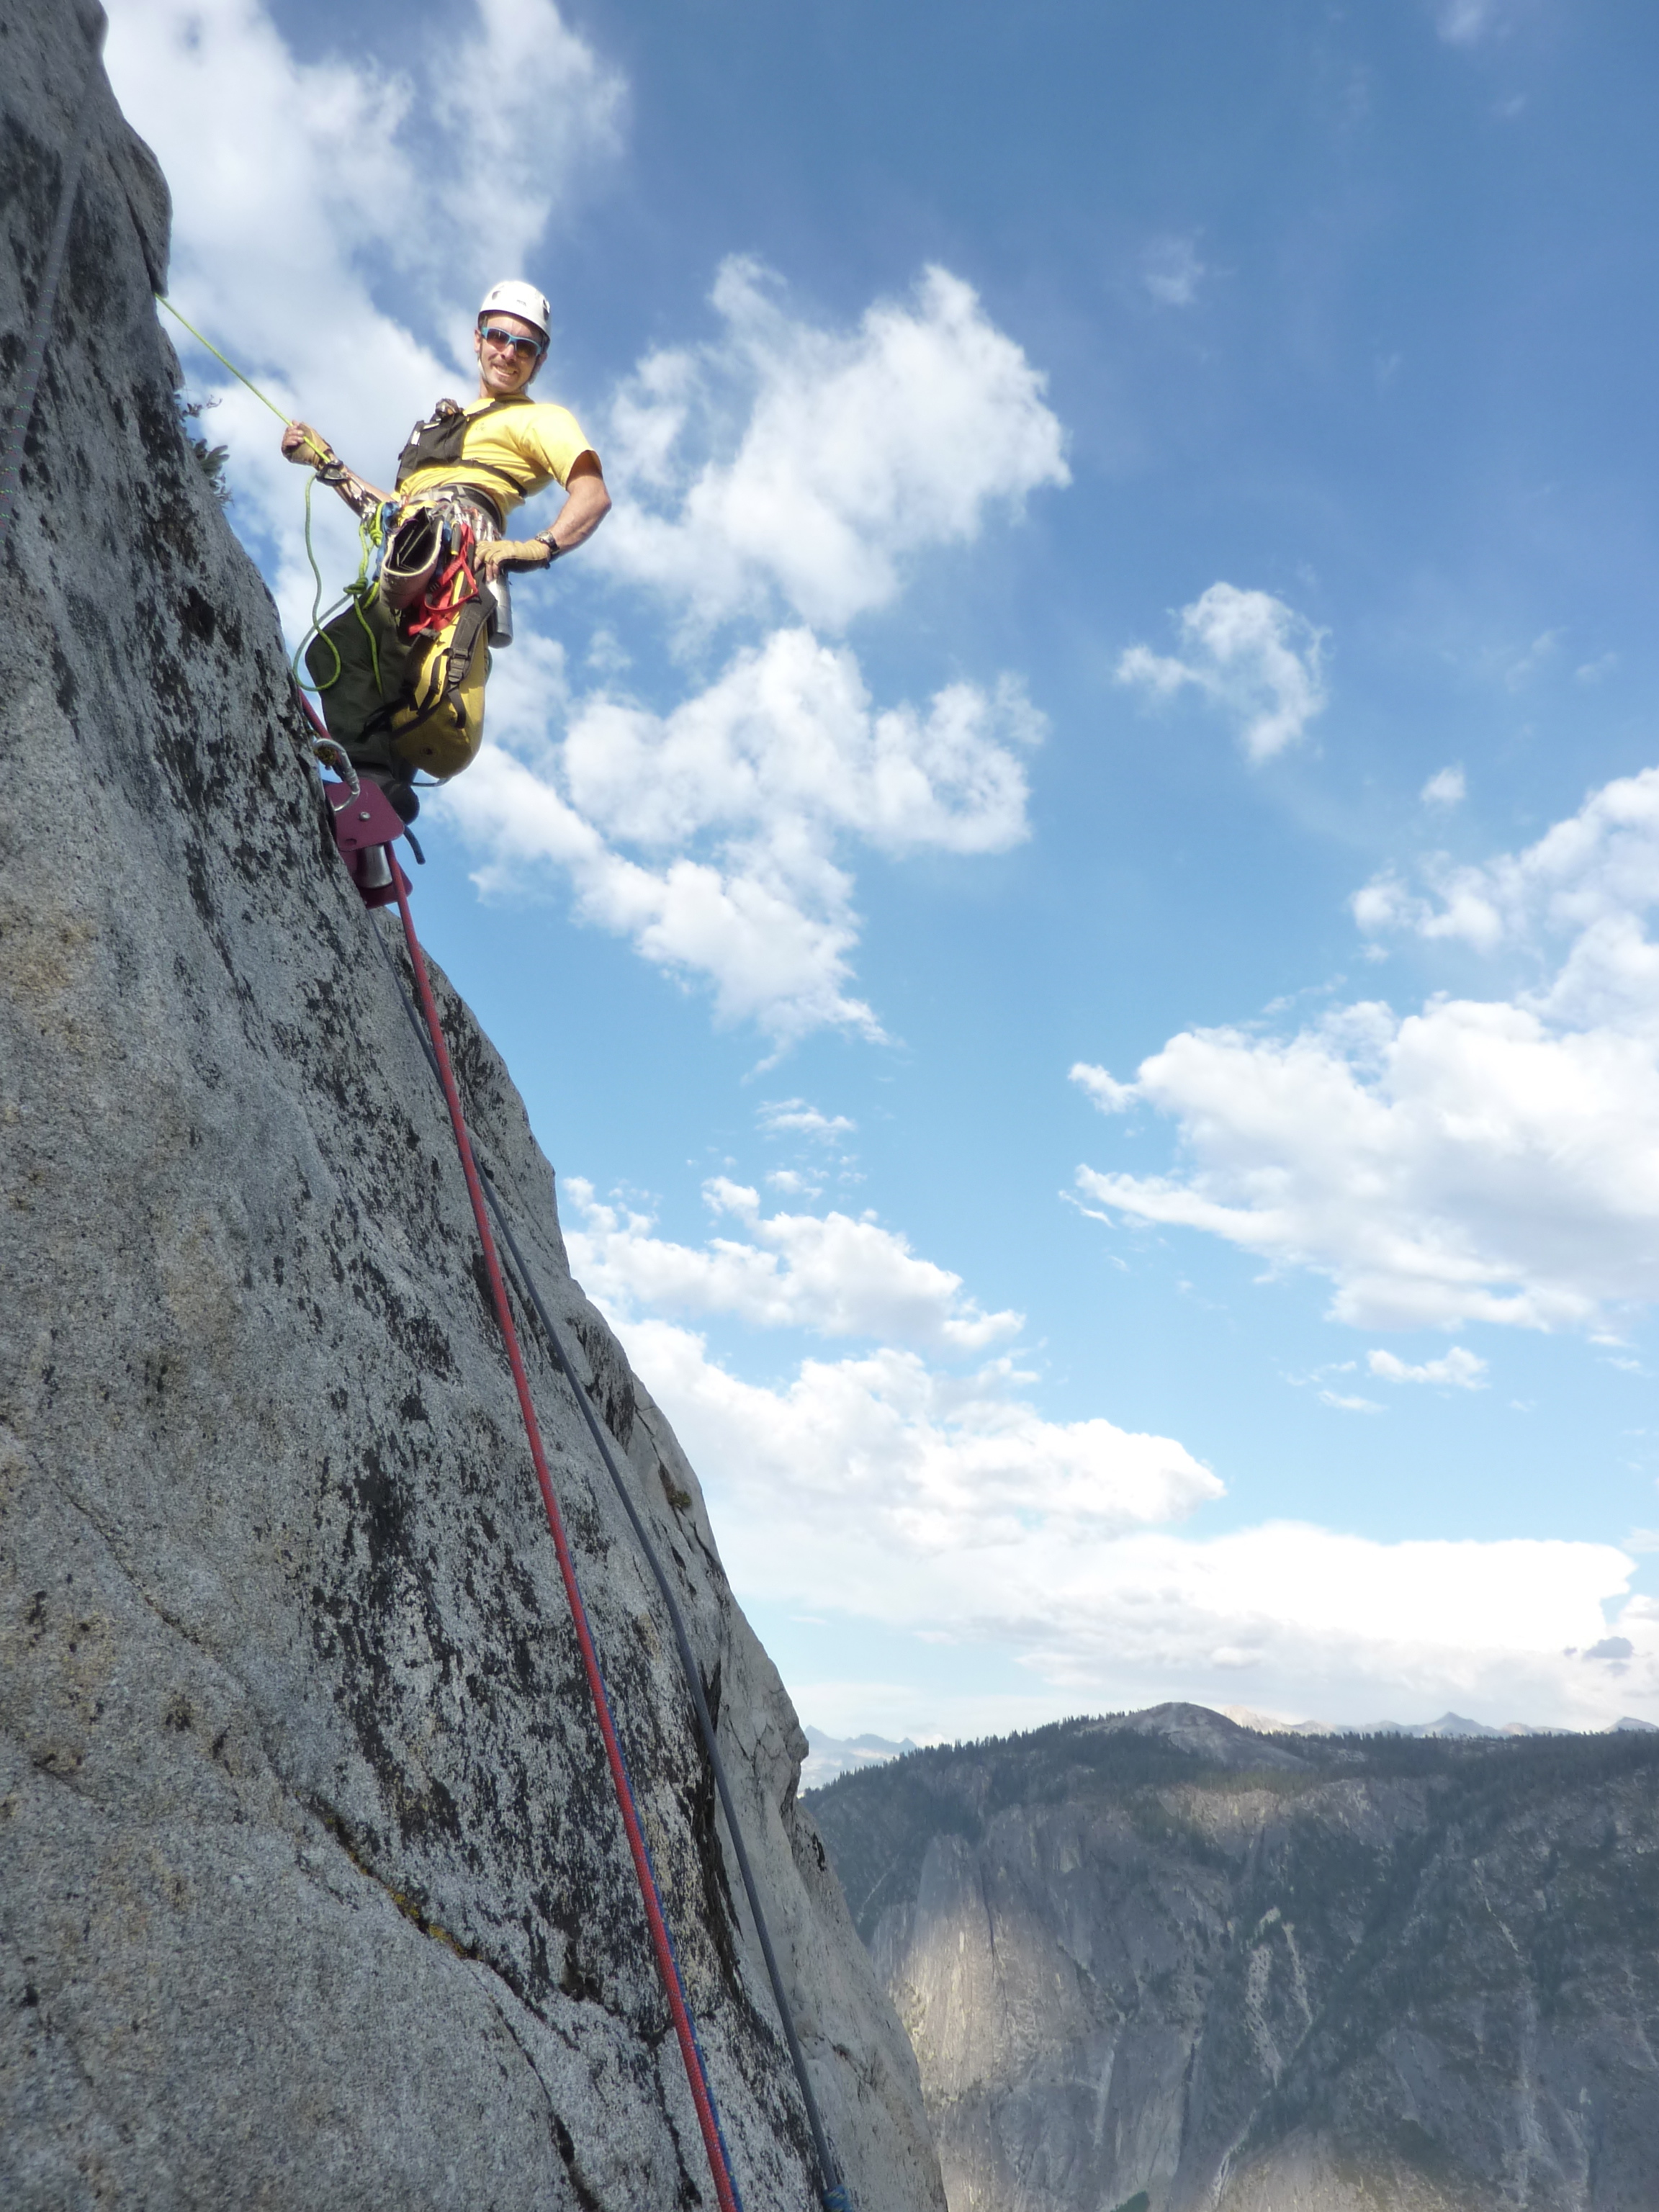 Search and Rescue employee rappelling down El Cap during a rescue.